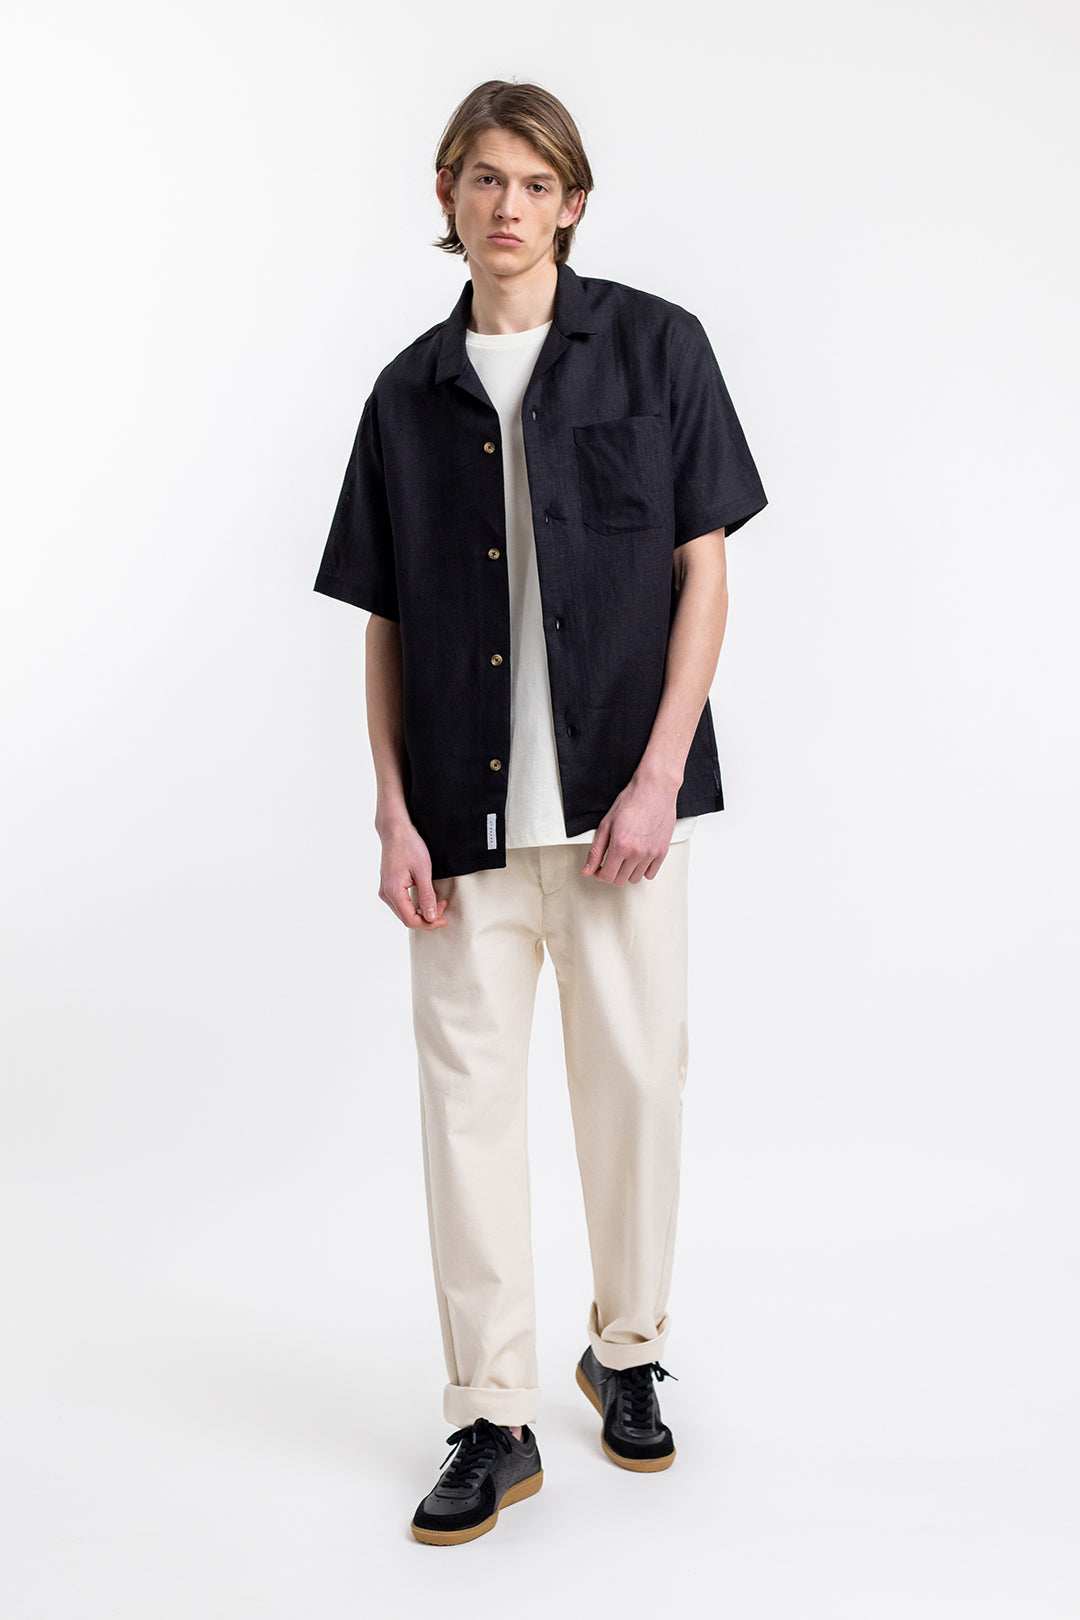 Black, short-sleeved bowling shirt made from 100% linen by Rotholz